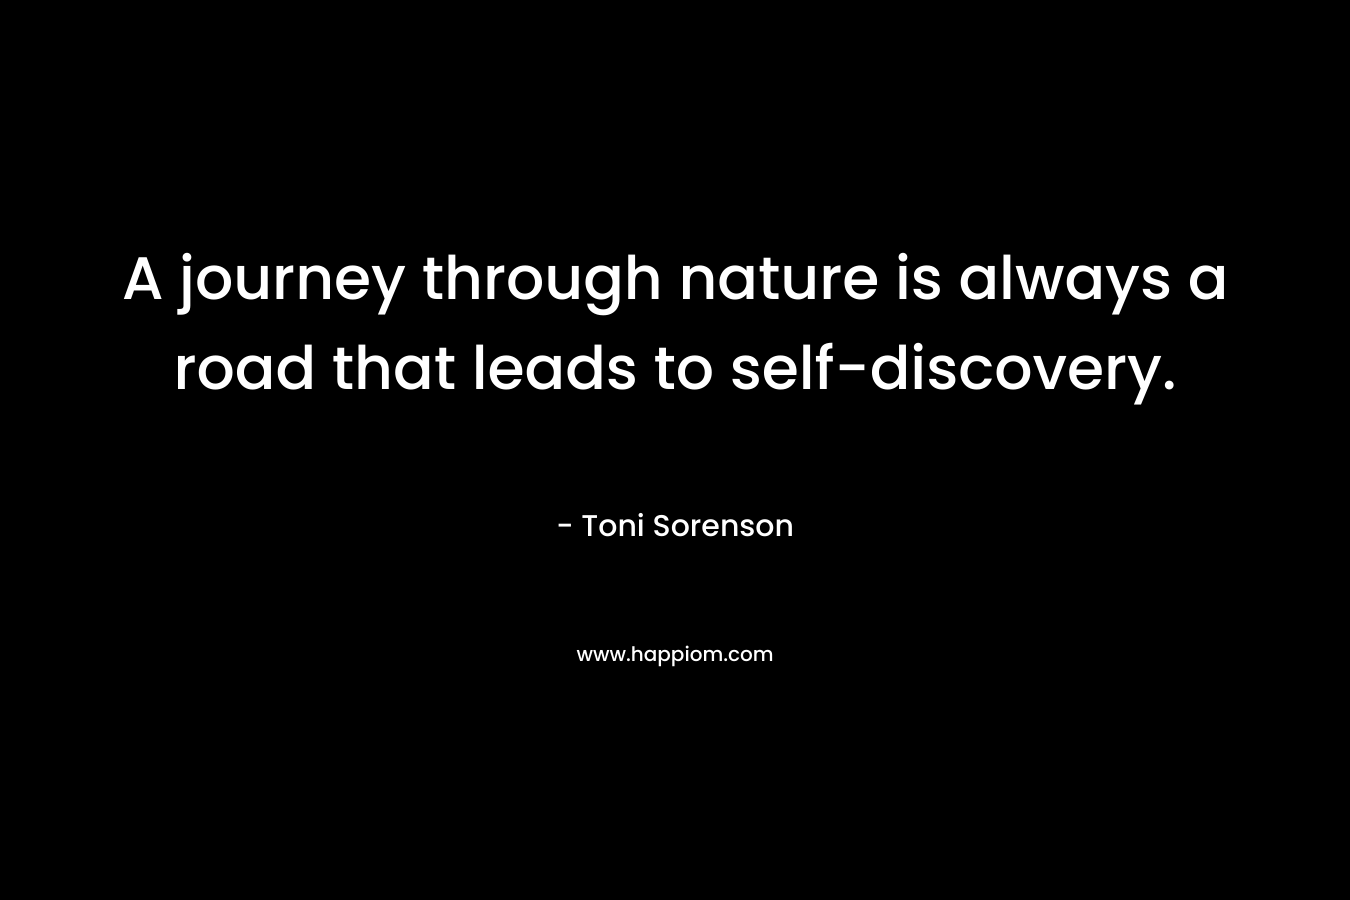 A journey through nature is always a road that leads to self-discovery. – Toni Sorenson